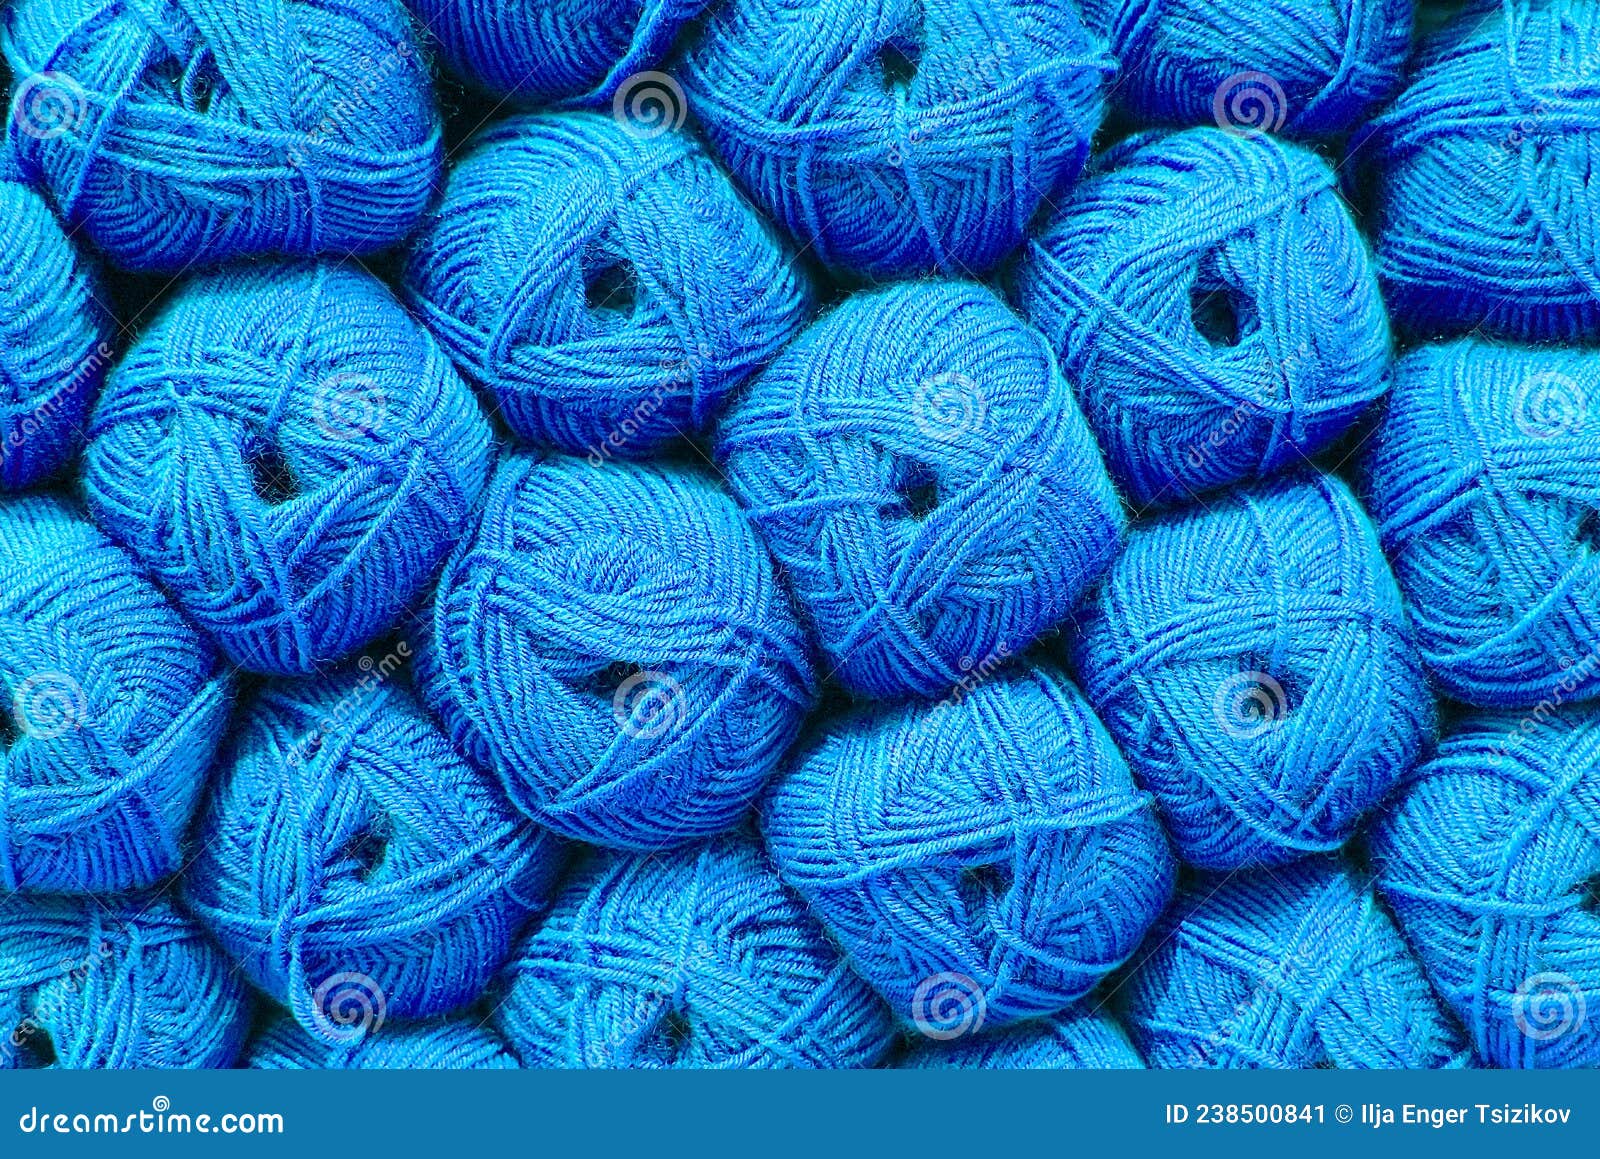 On Long Knitting Needles, a Row of Neat, Even Loops of Yarn of a